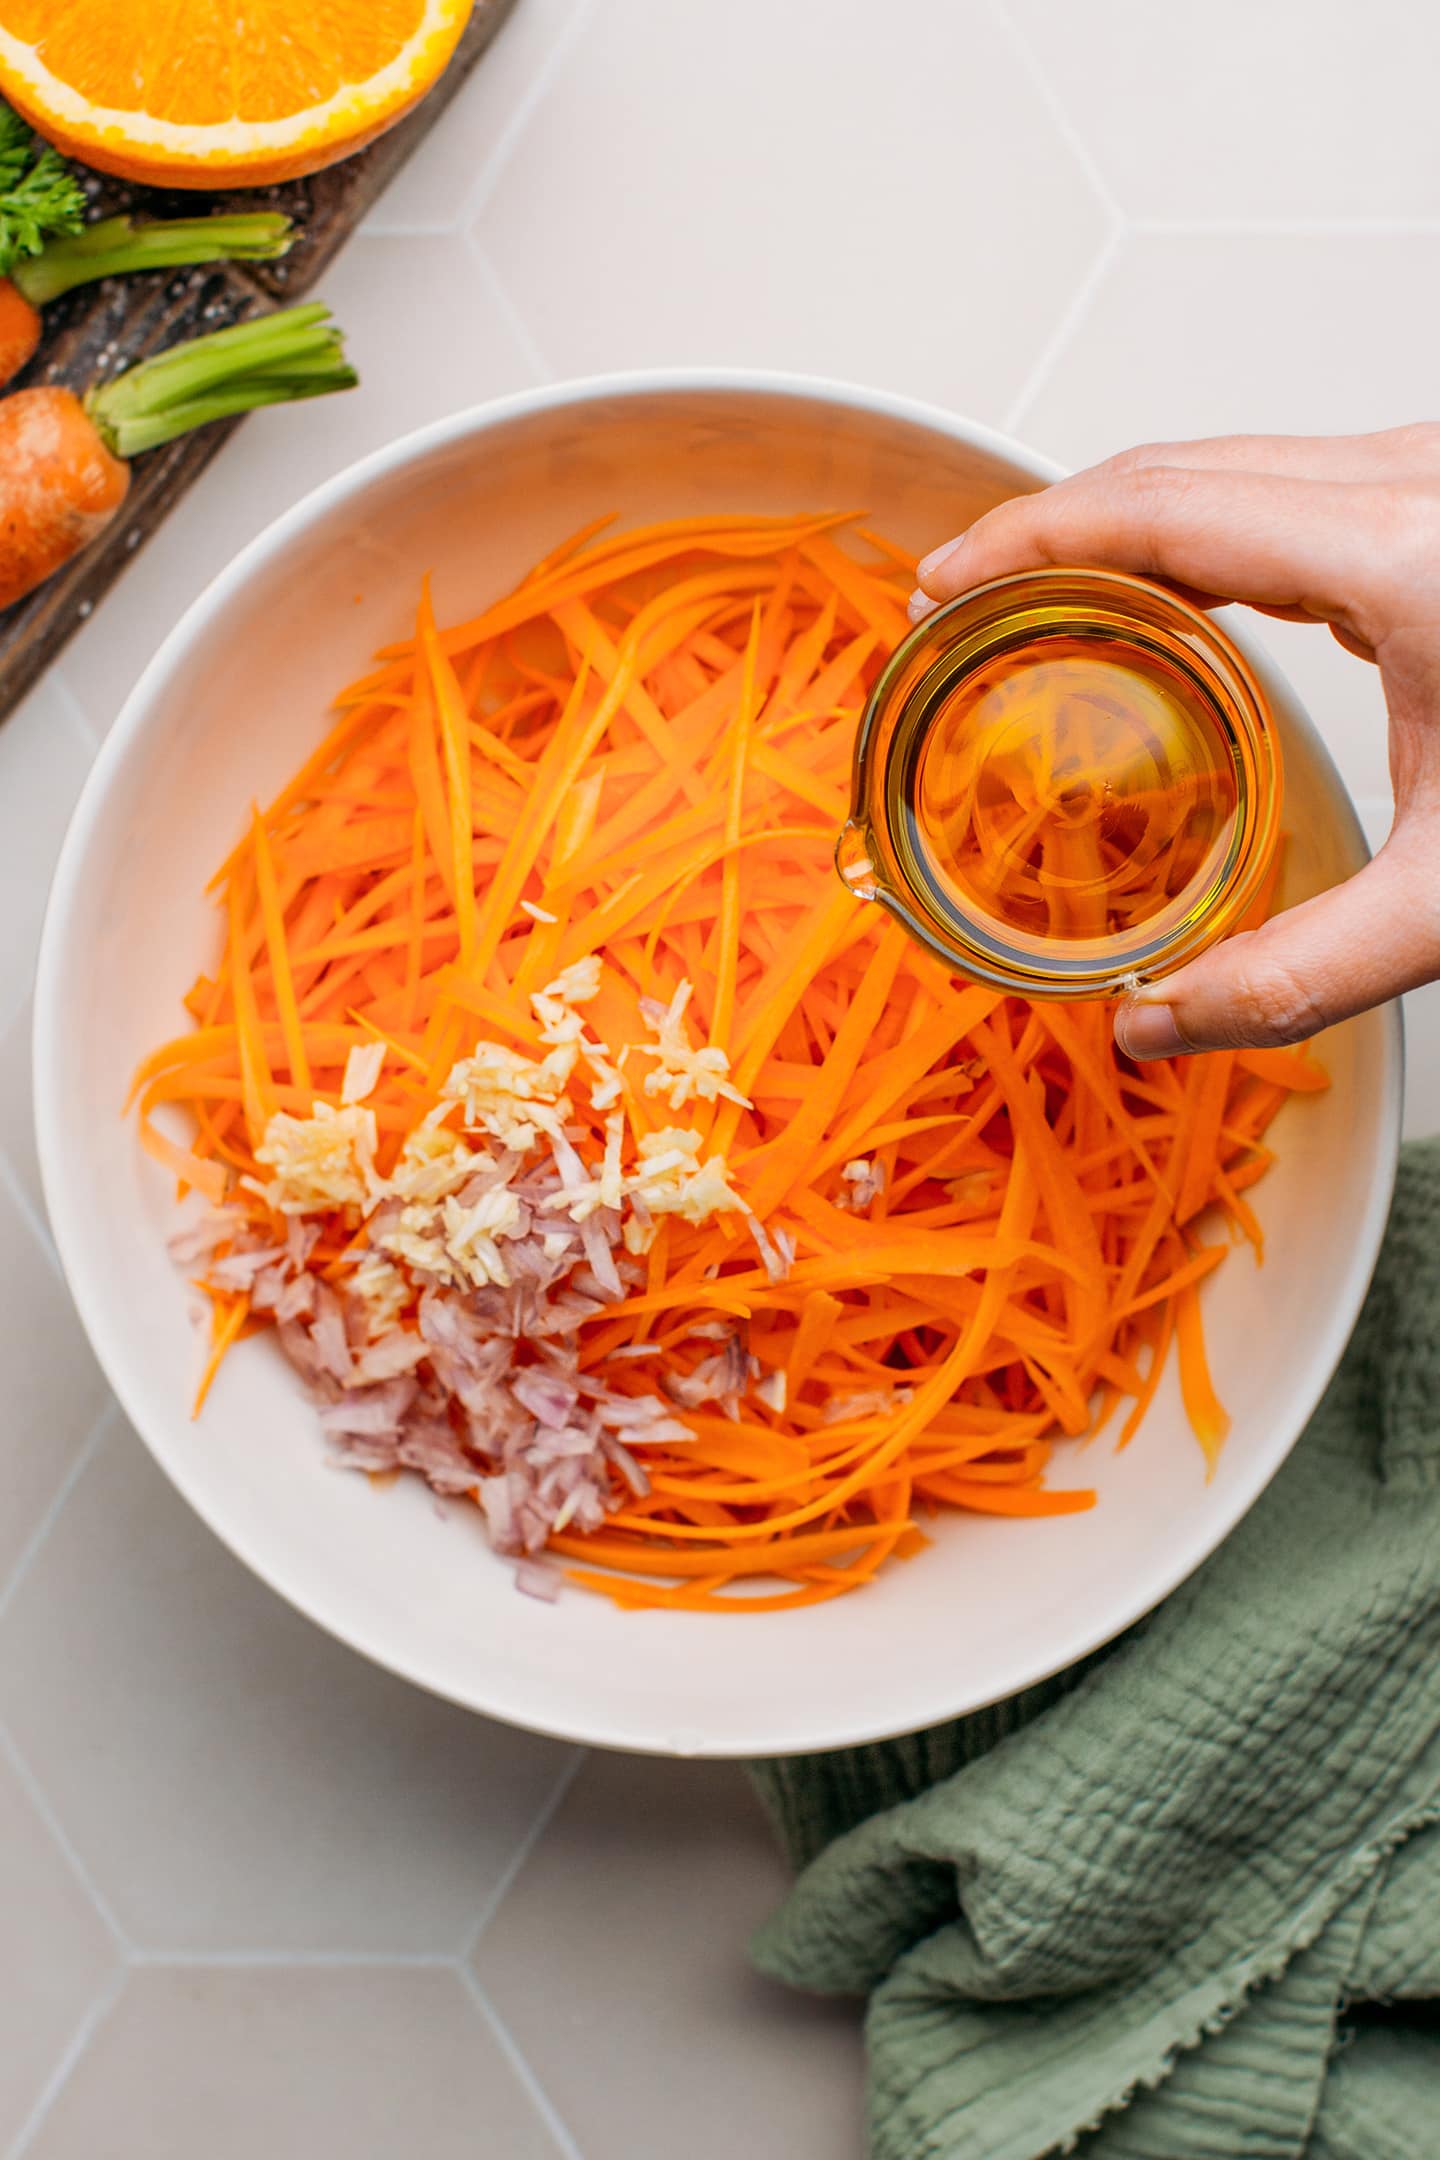 Pouring olive oil into a bowl containing grated carrots.